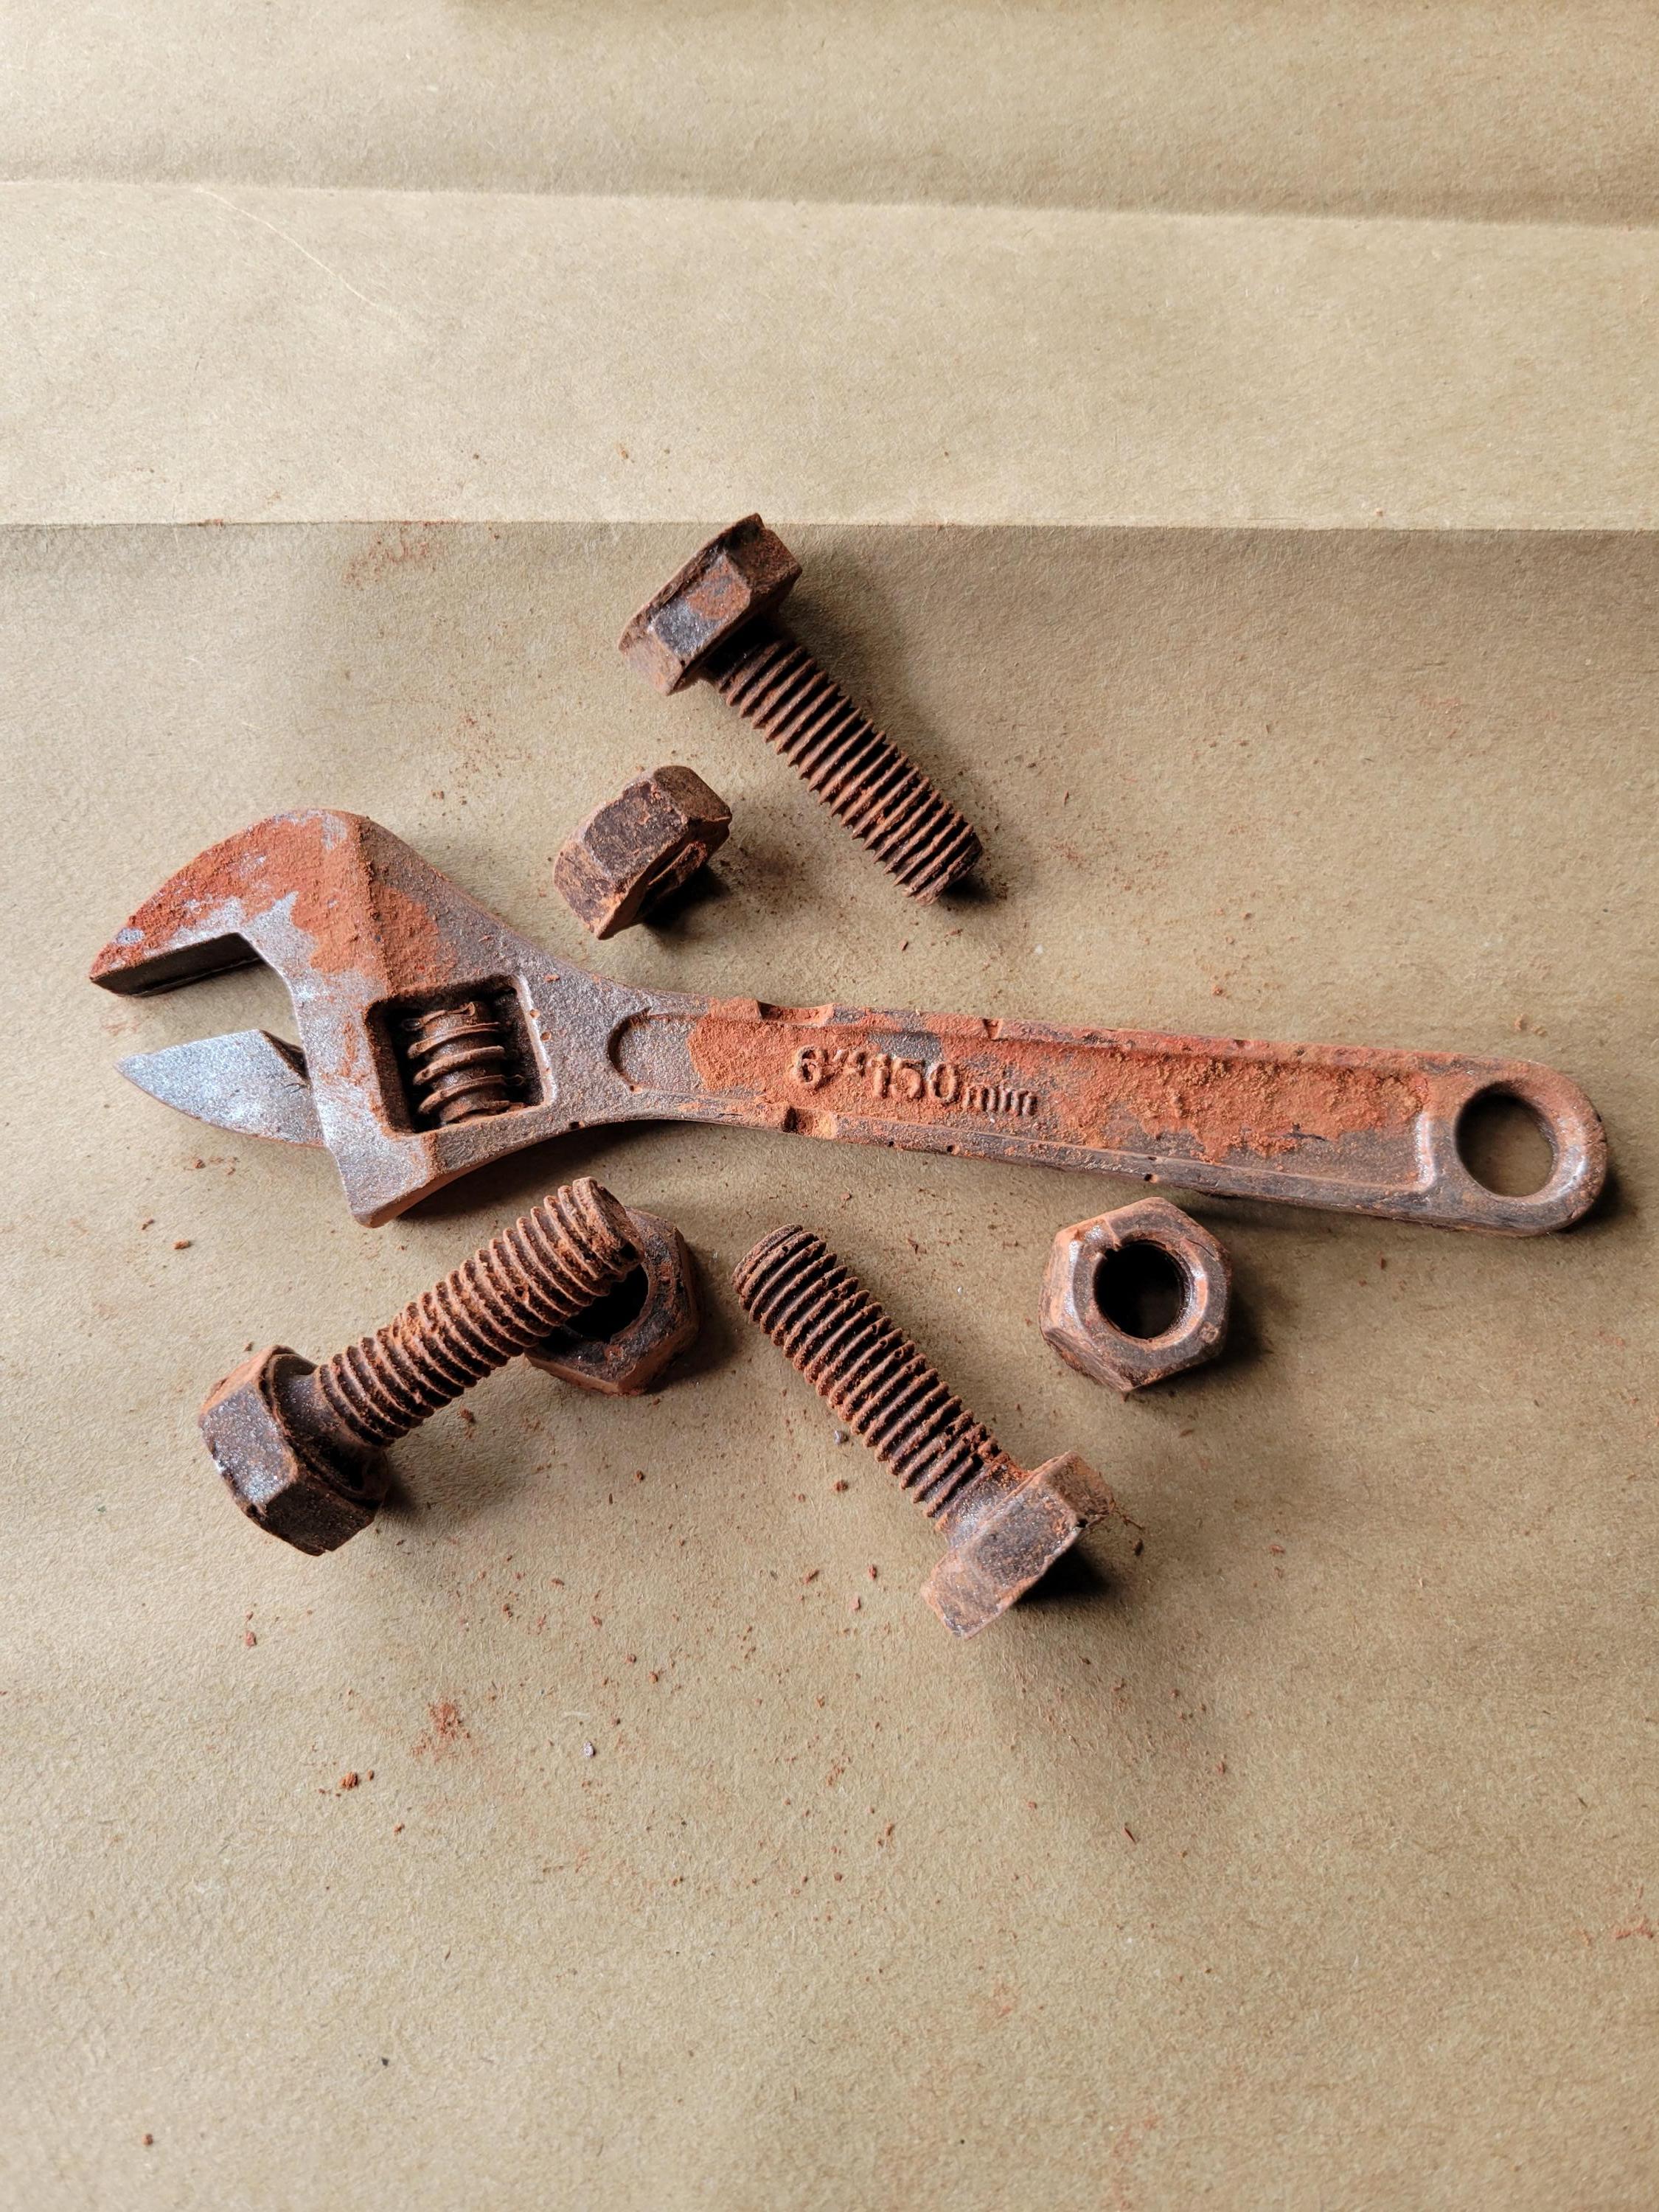 Rusty Tools Made from Chocolate, Bruges, Belgium